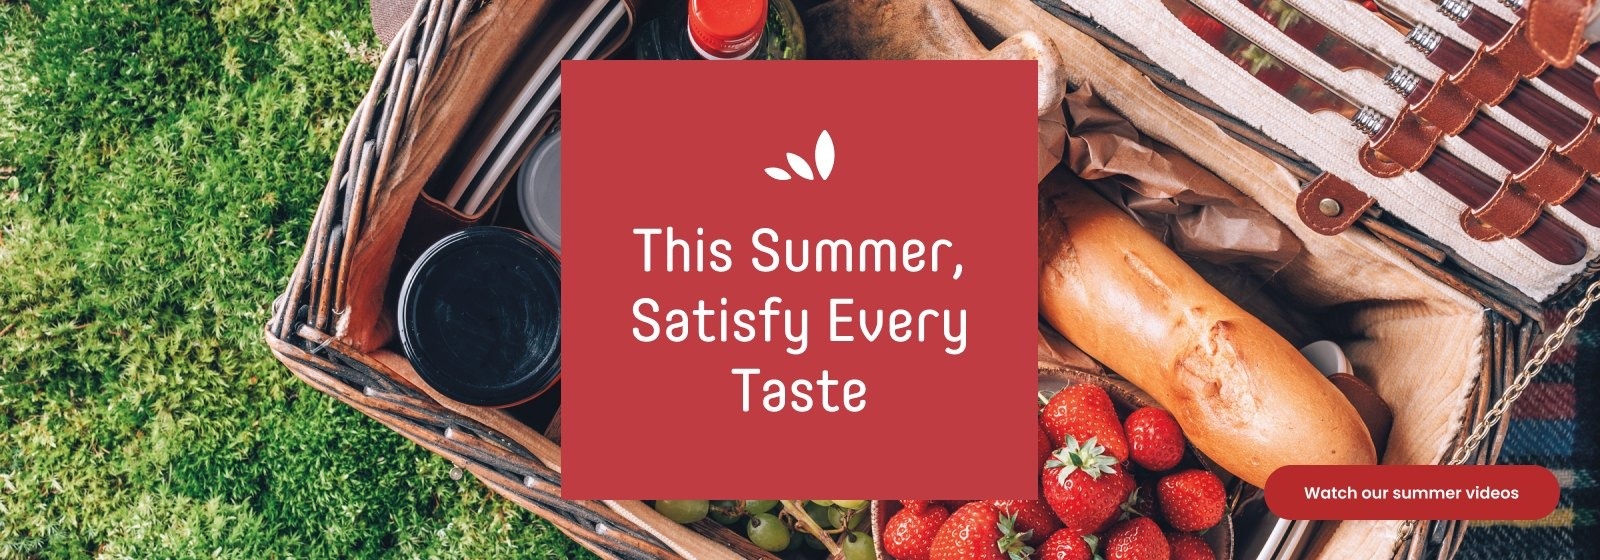 Text reading, “This summer, satisfy every taste. To know more click on the ‘Watch our summer videos’ button.”